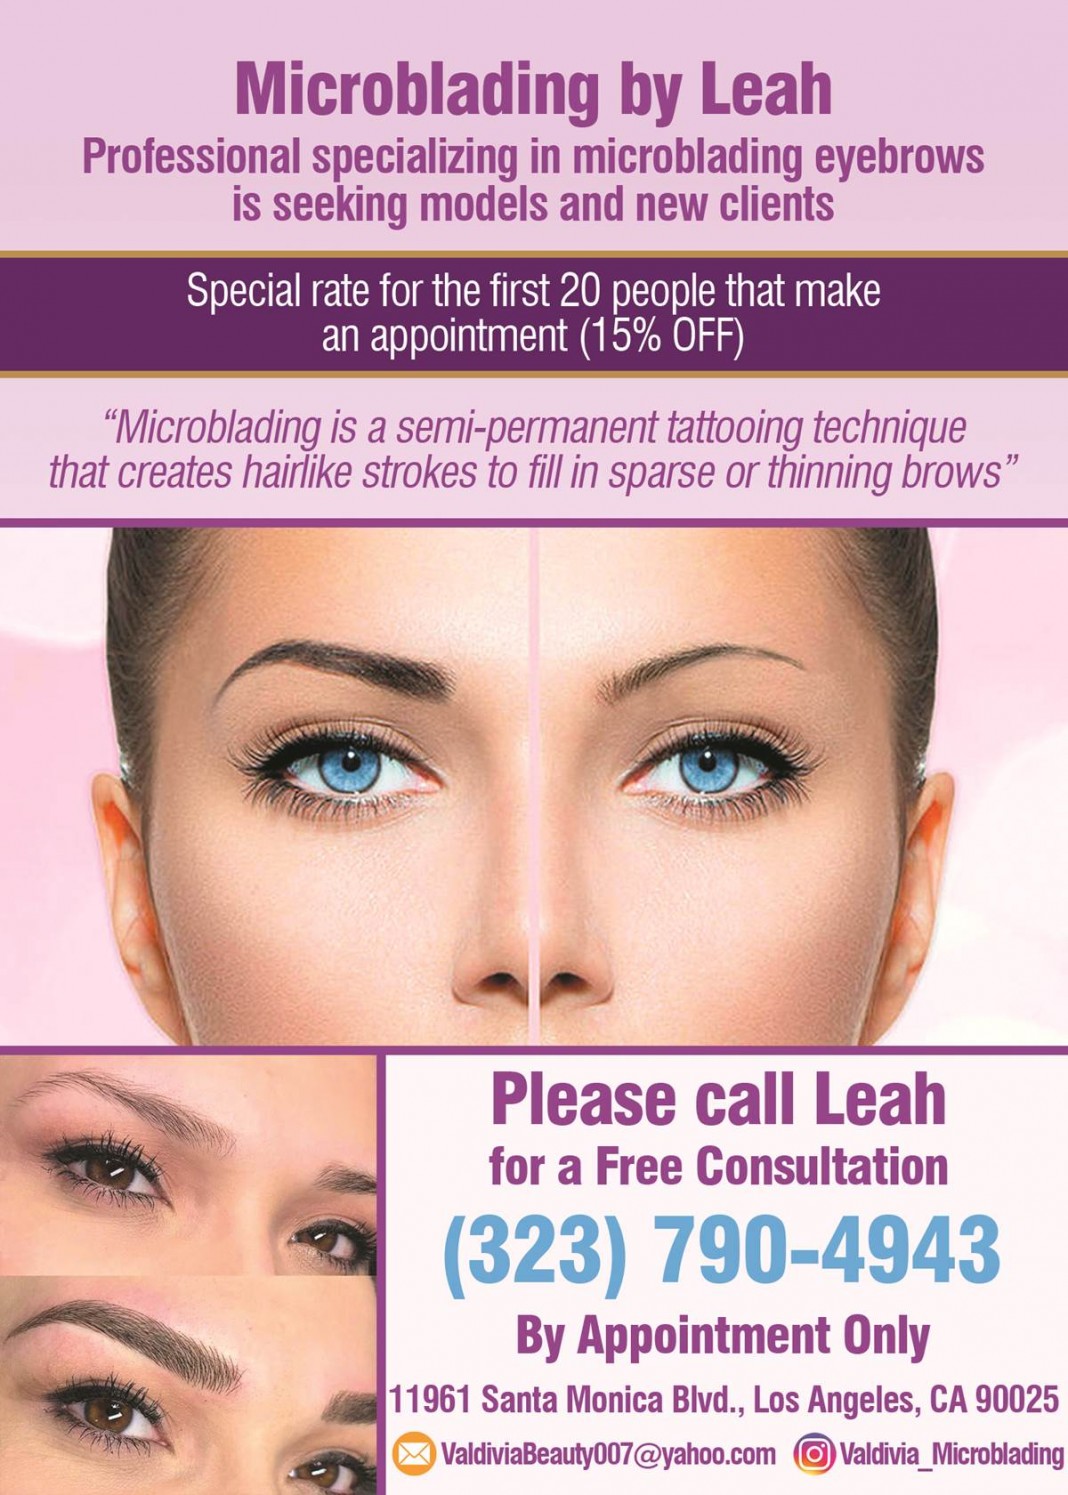 Microblading by Leah